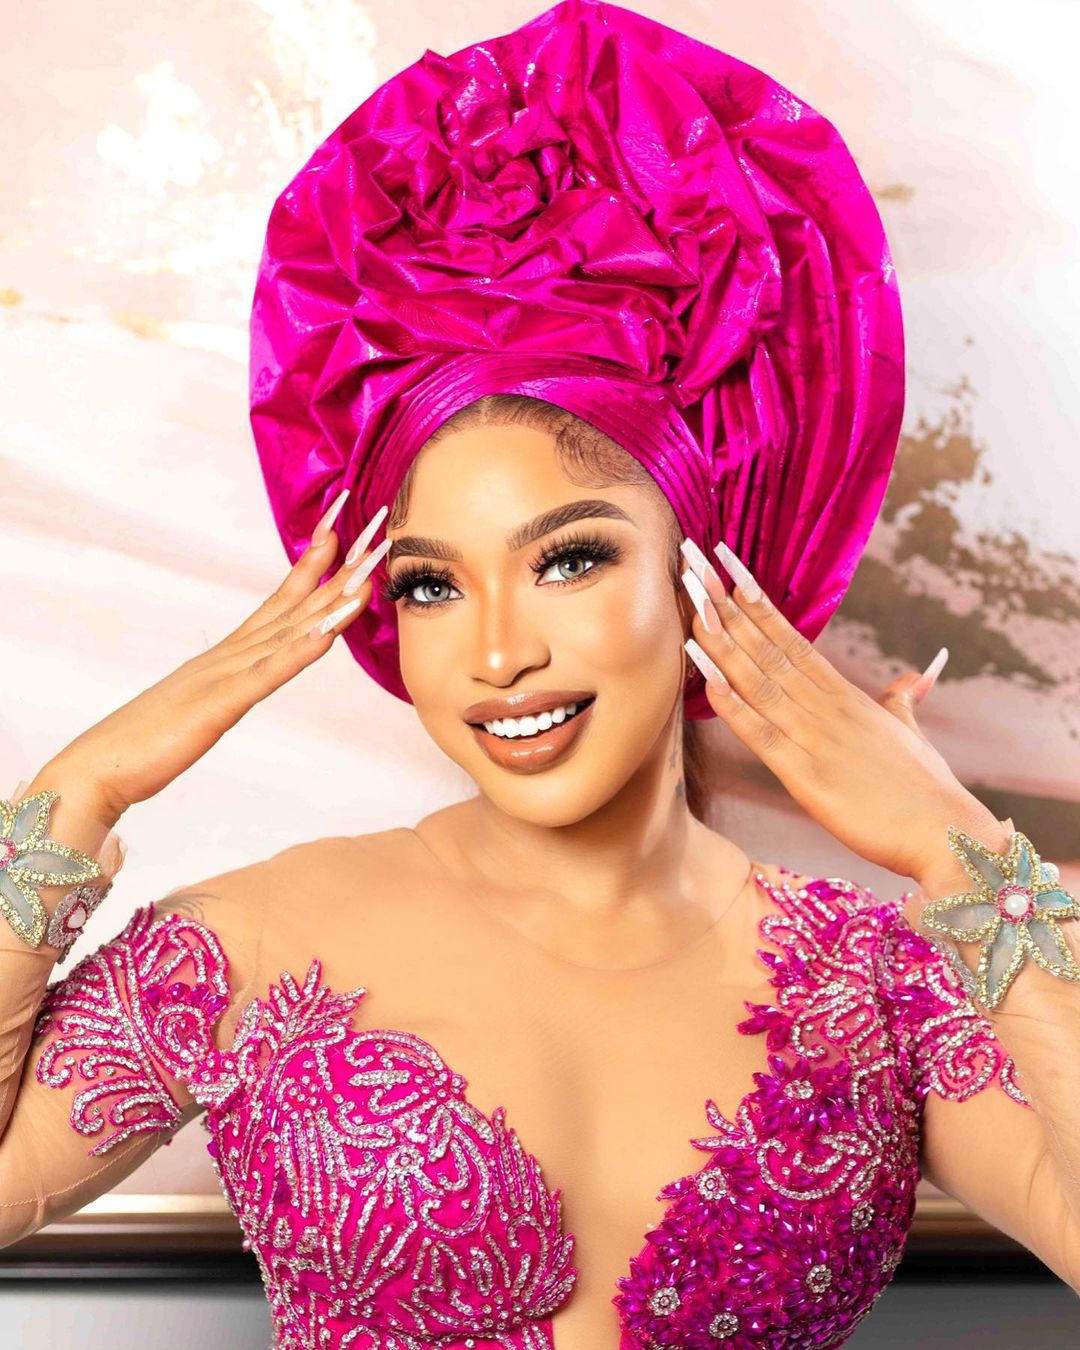 Tonto Dike Is Giving Model Classes on Rocking Radiant Colors For Your Igbo Trad!